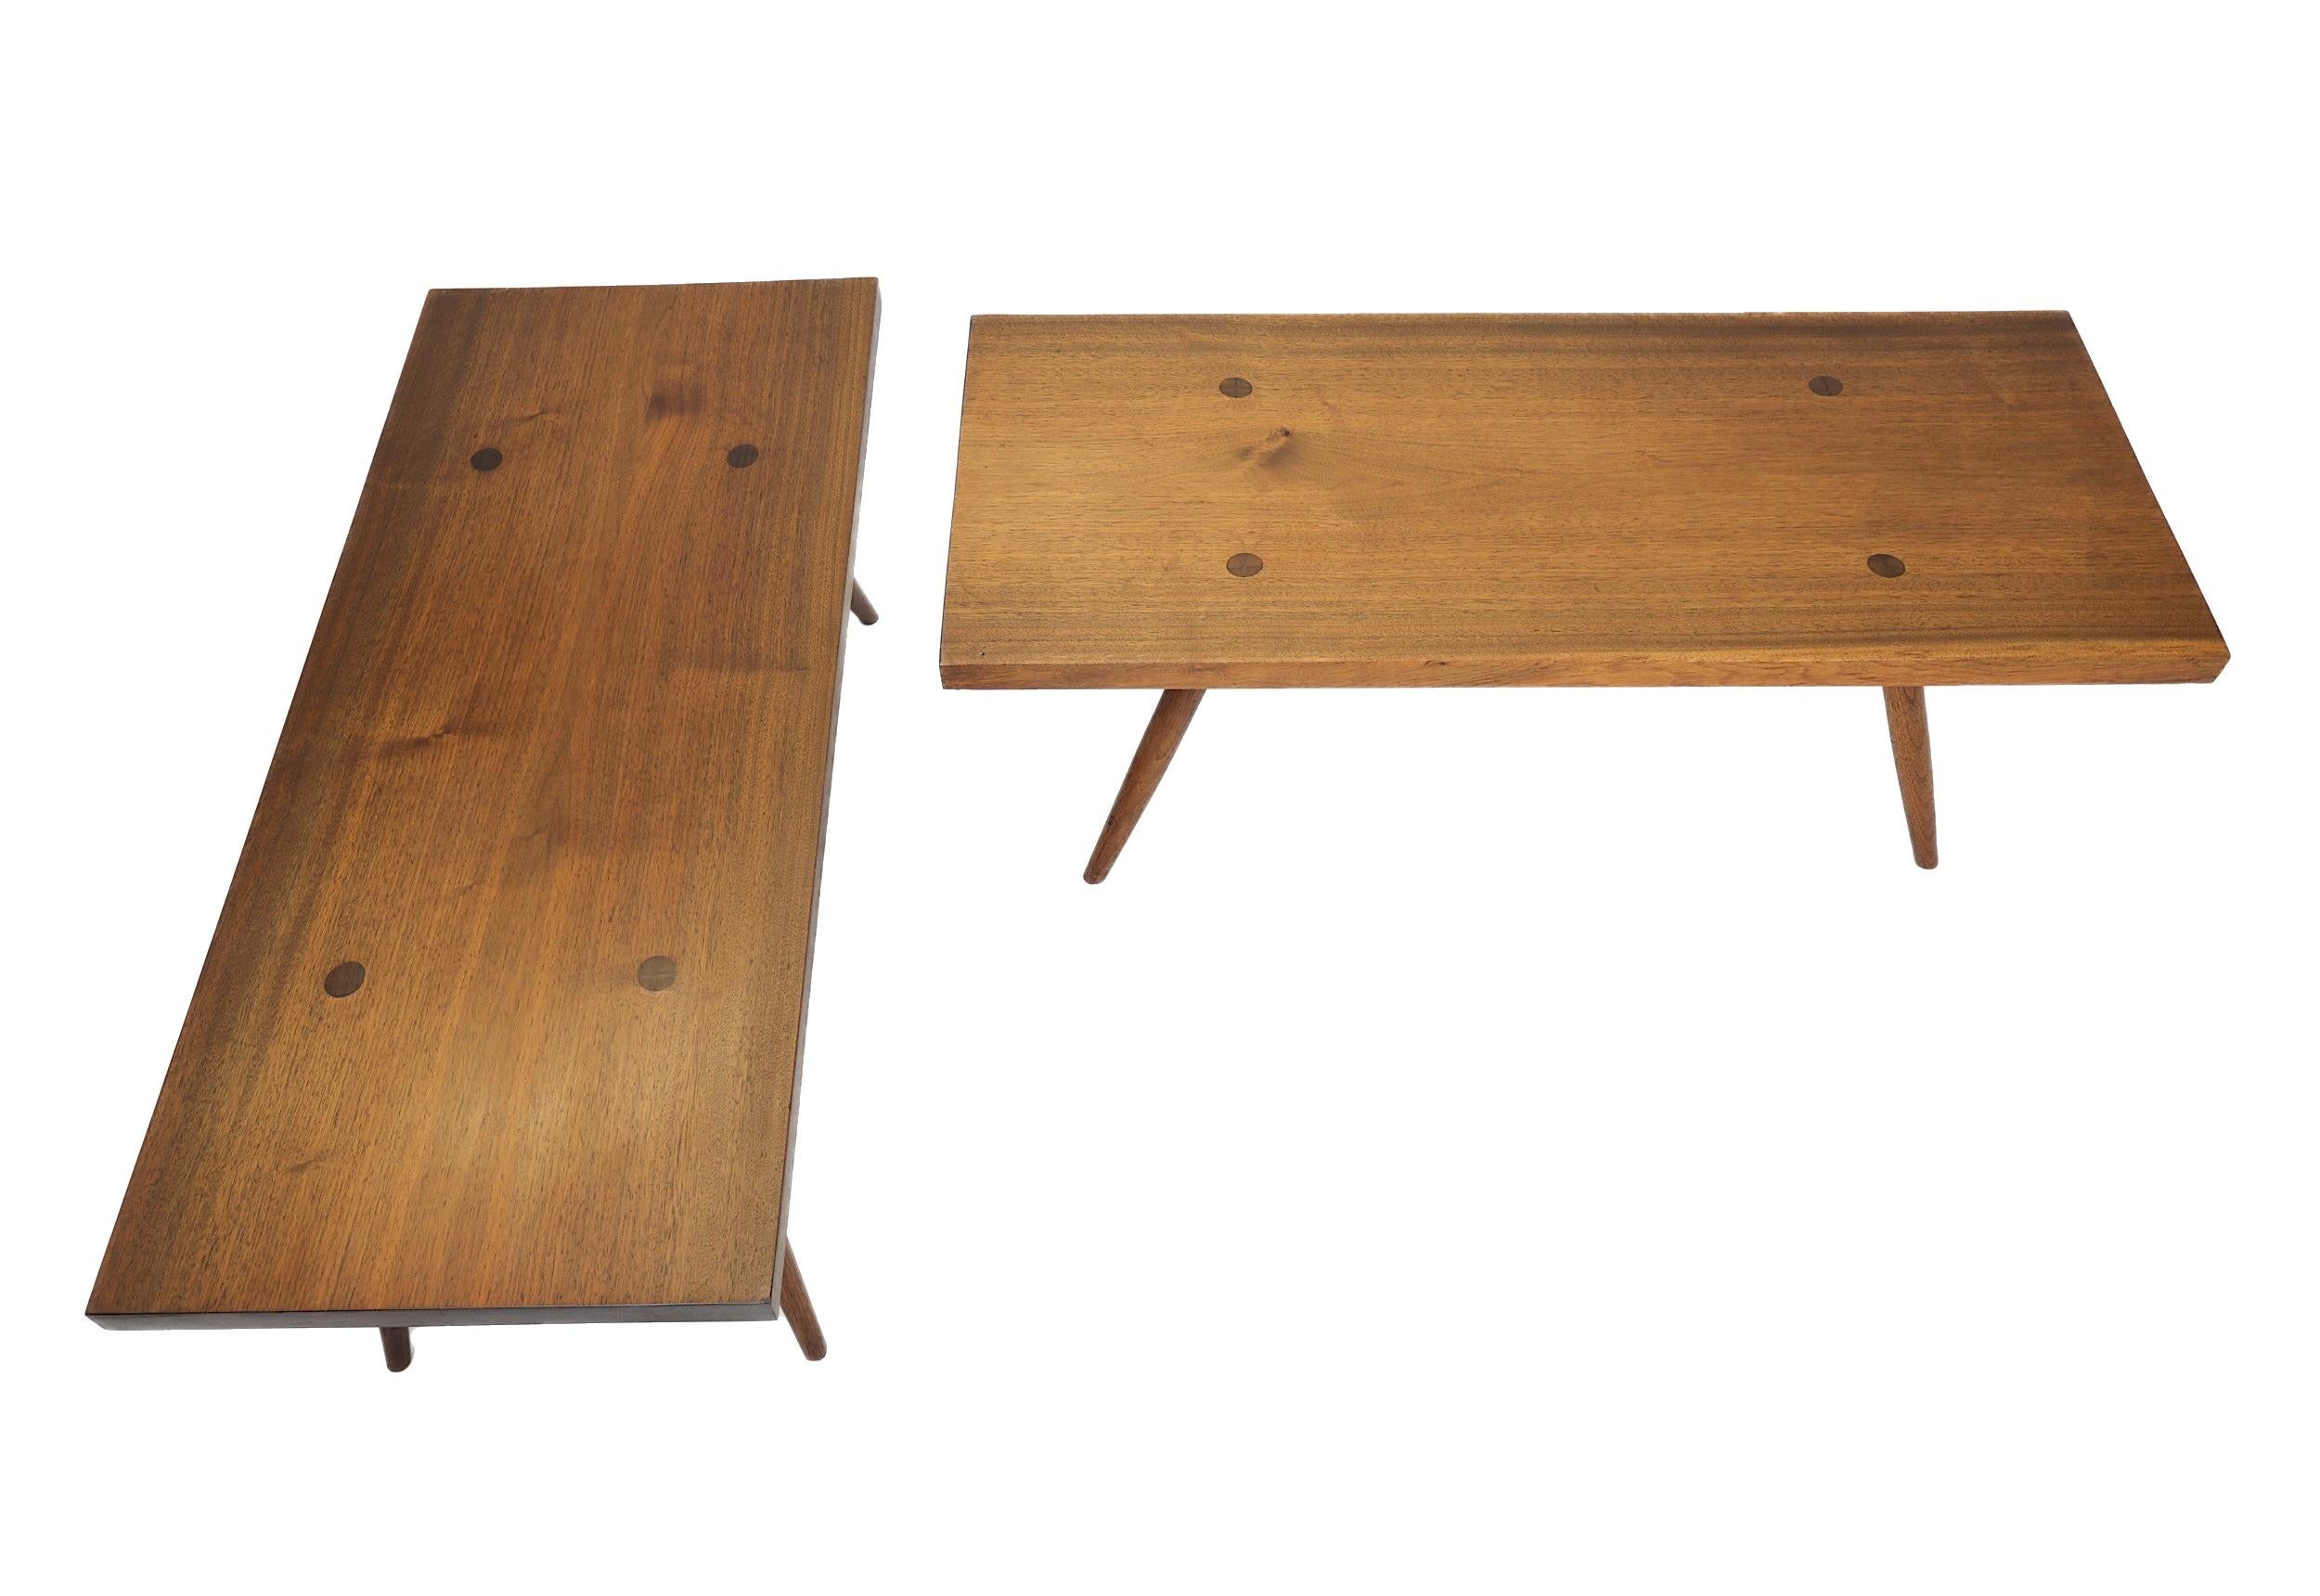 A matched pair of long George Nakashima Tables.
Legs post through the top.
Original finish.